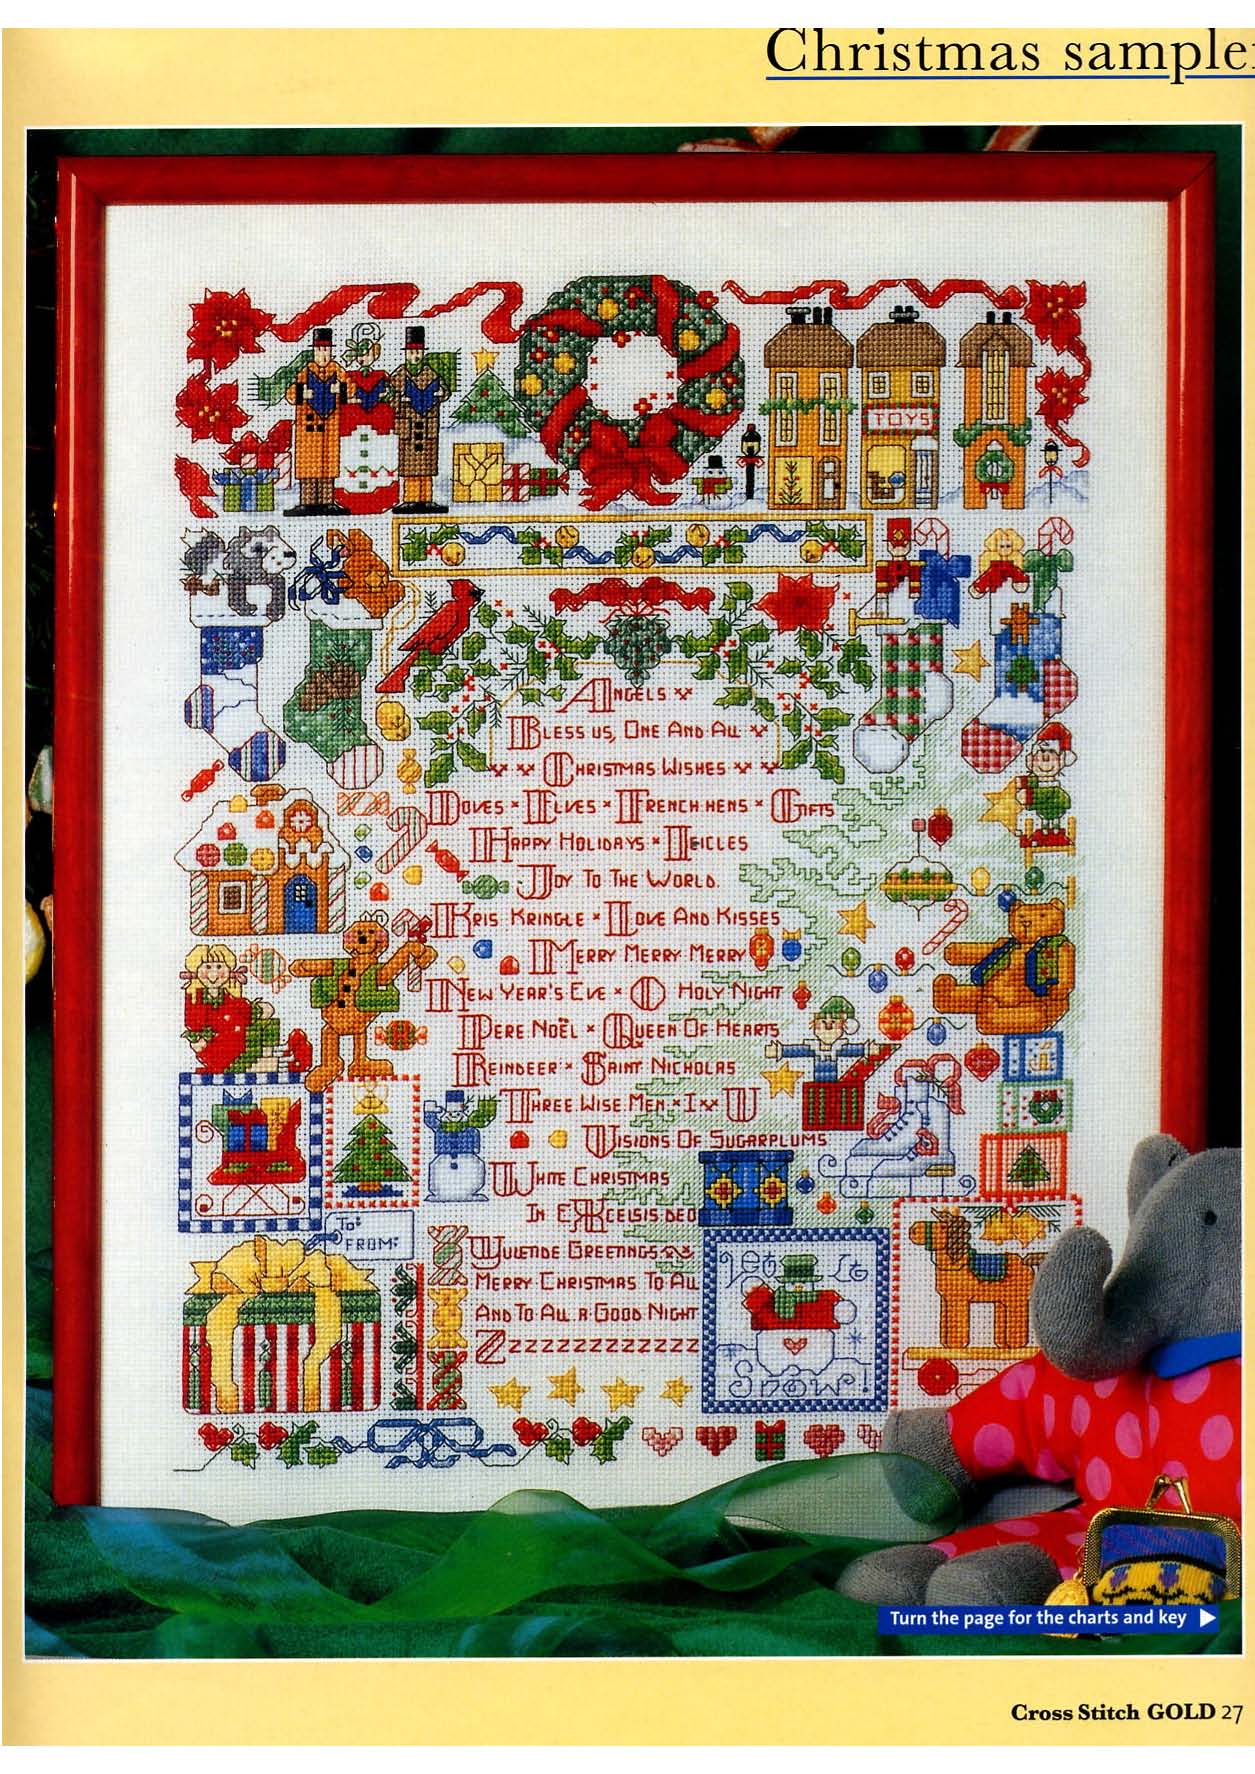 Christmas sampler with lots of details (1)